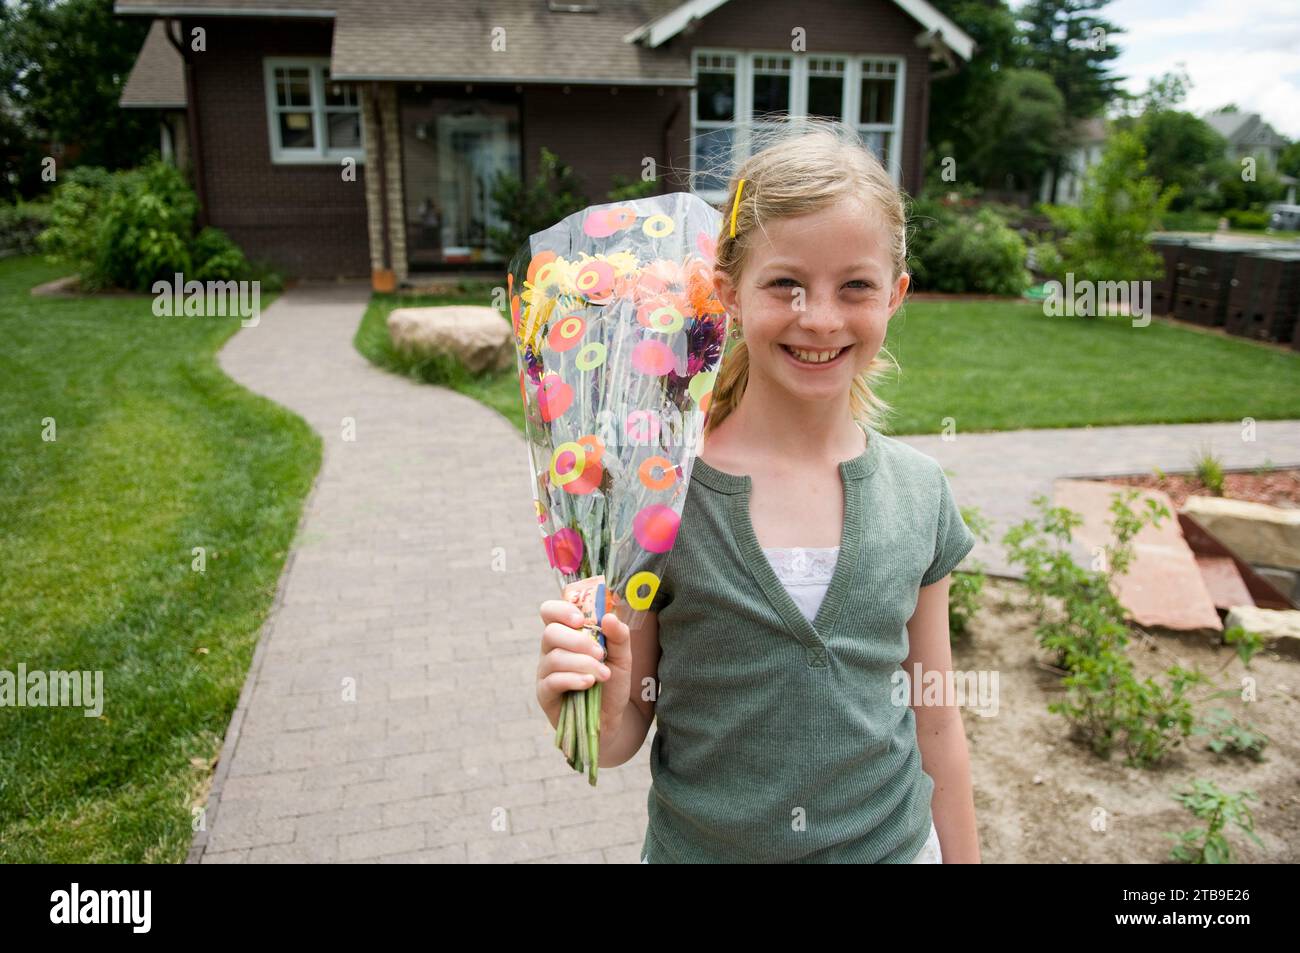 Girl brings home a bouquet of flowers; Lincoln, Nebraska, United States of America Stock Photo